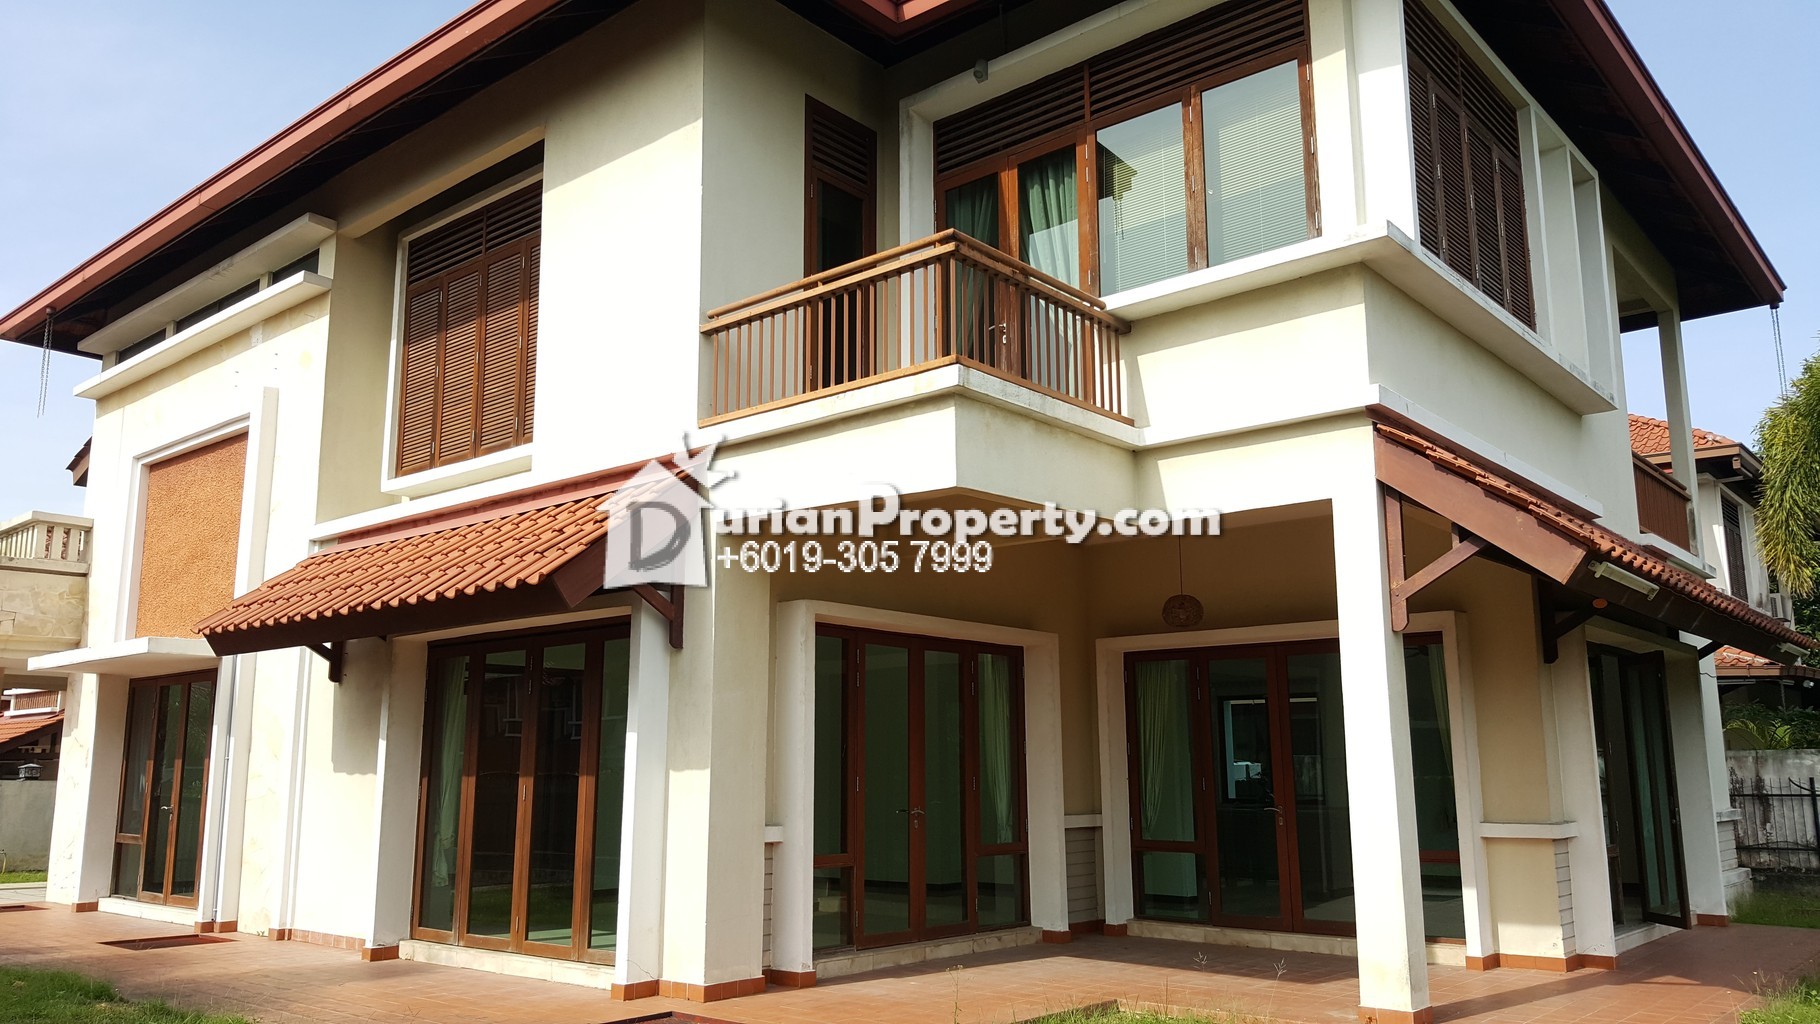 Bungalow House For Sale At Sunway Rahman Putra Bukit Rahman Putra For Rm 3 000 000 By Jacqueline Choe Durianproperty